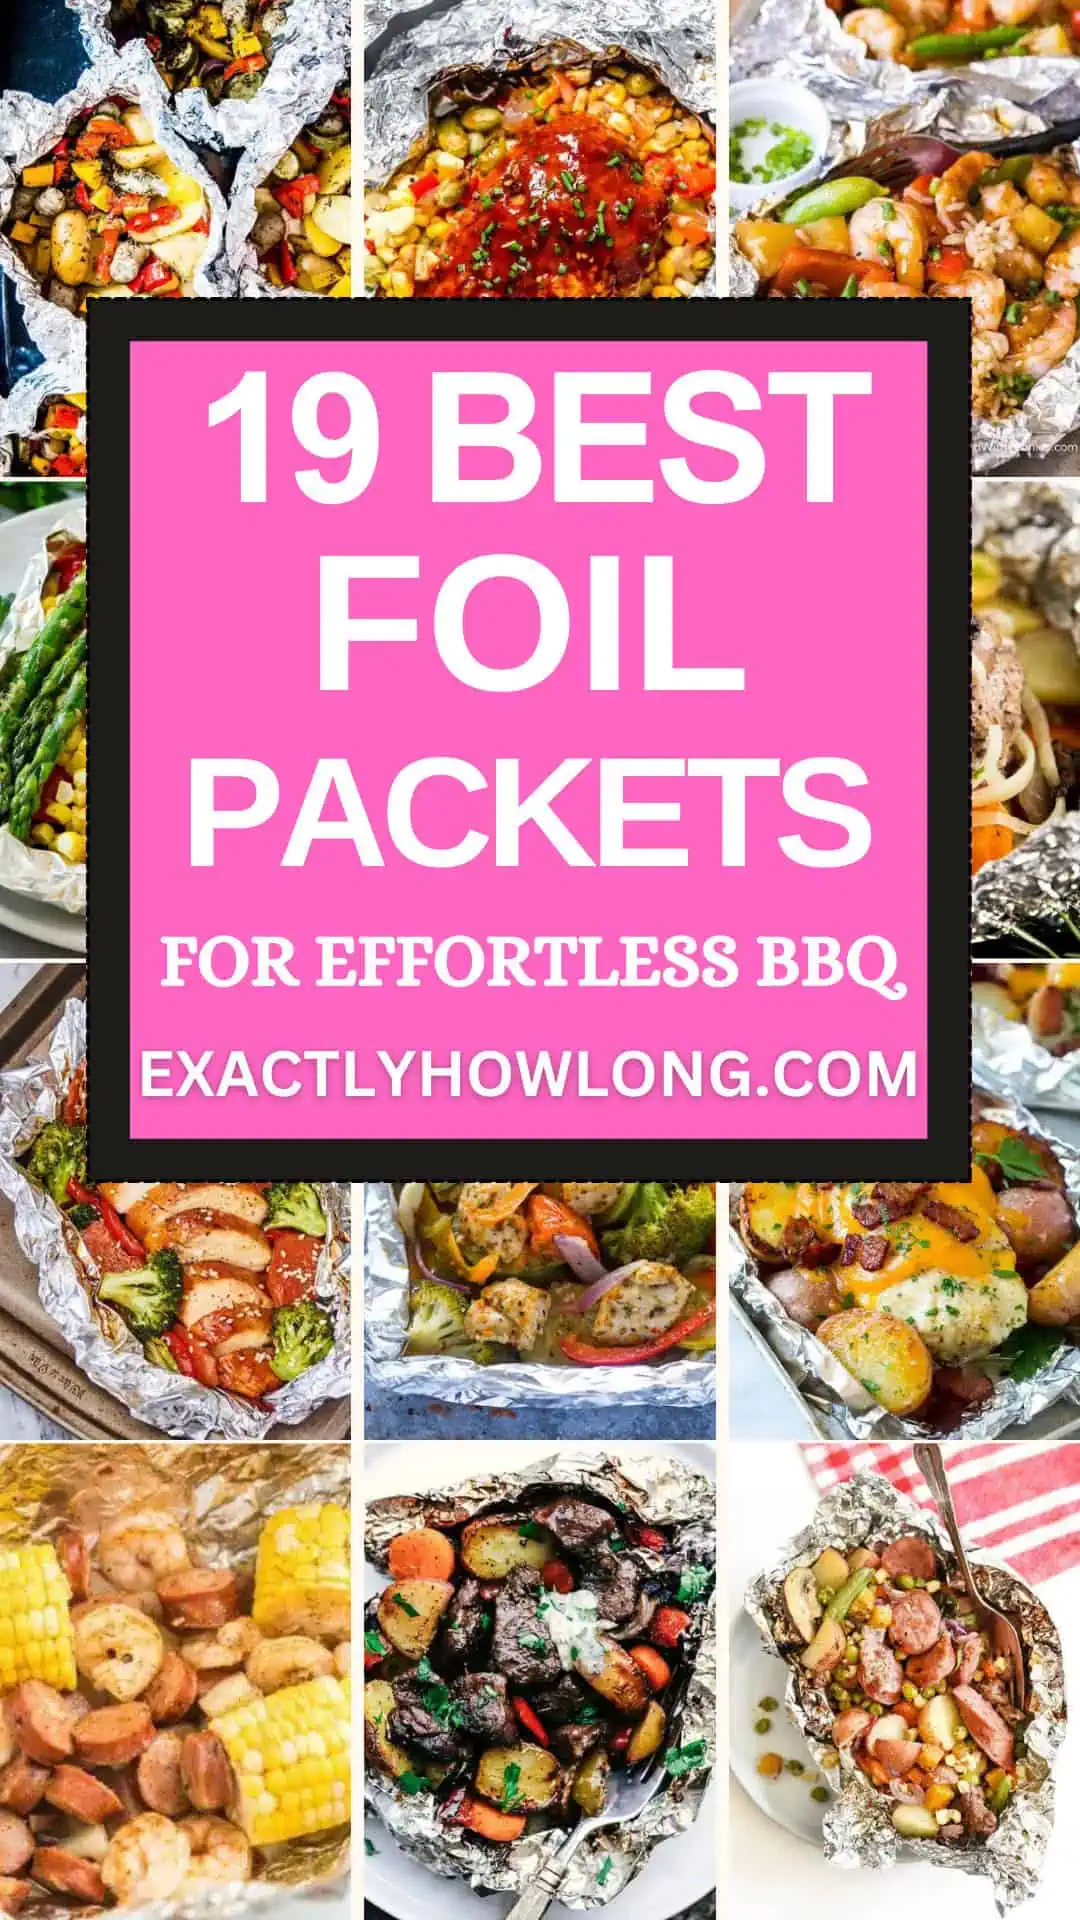 Foil Packets For The Grill